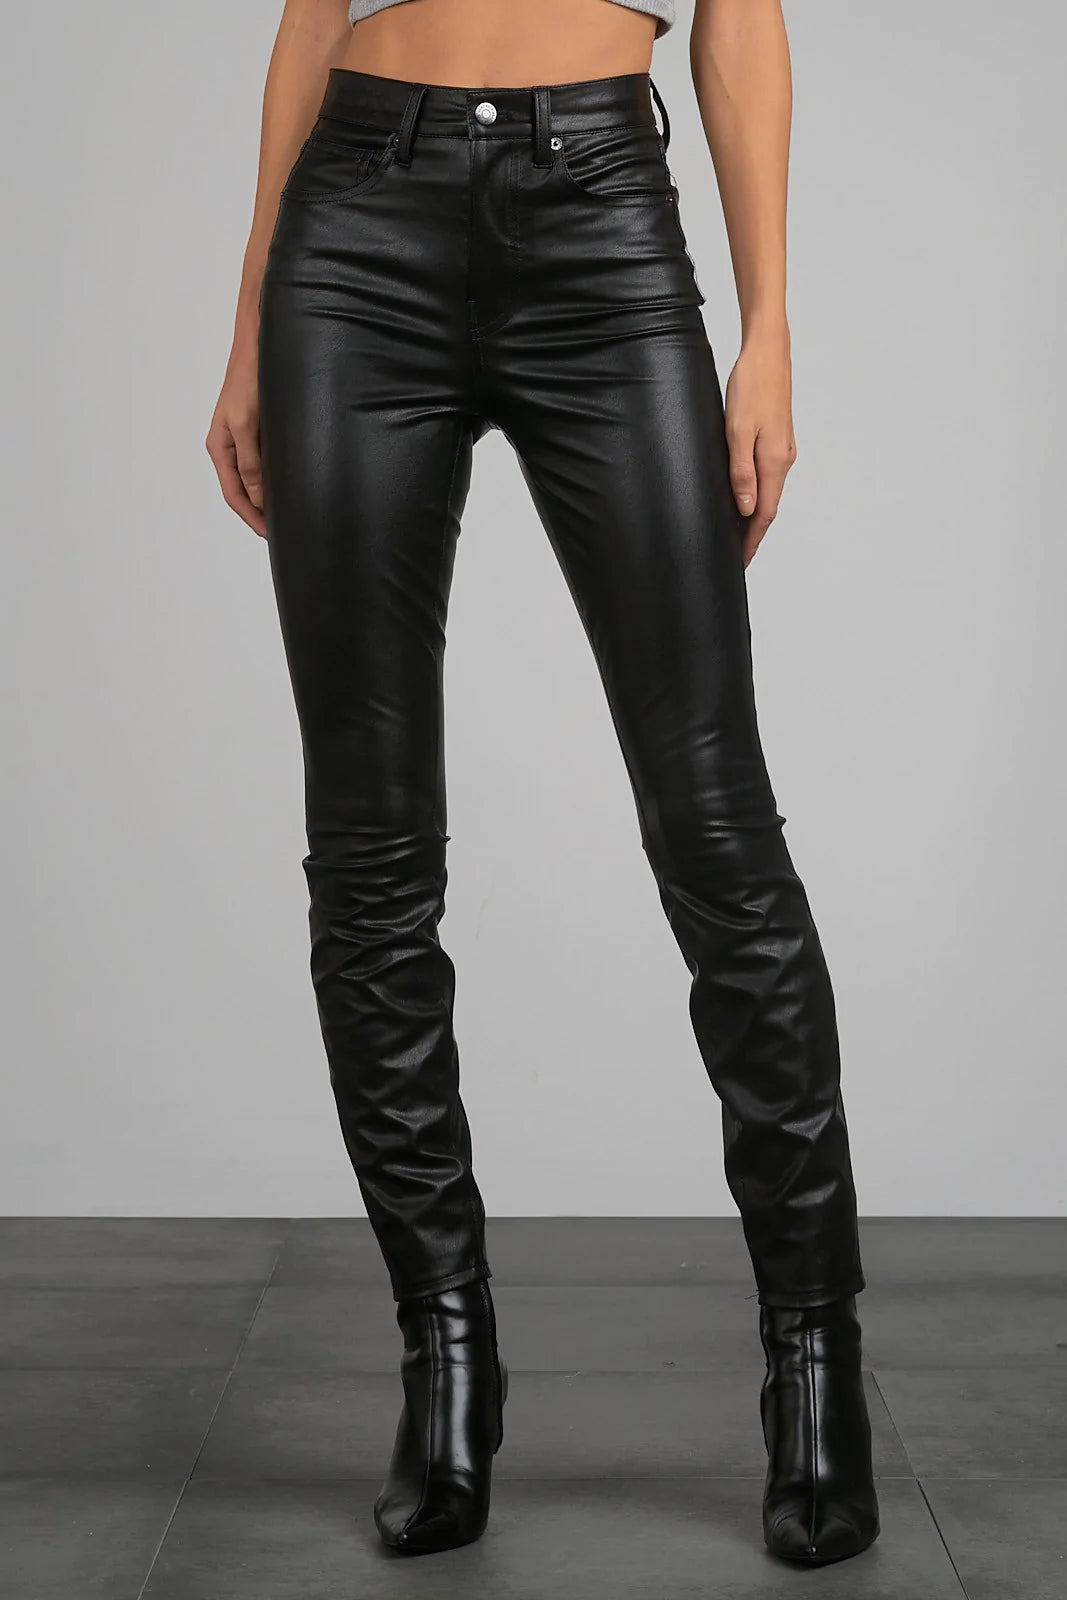 Judy Blue Black High Waist Tummy Control Leather Straight Leg Pants -  Boujee Boutique